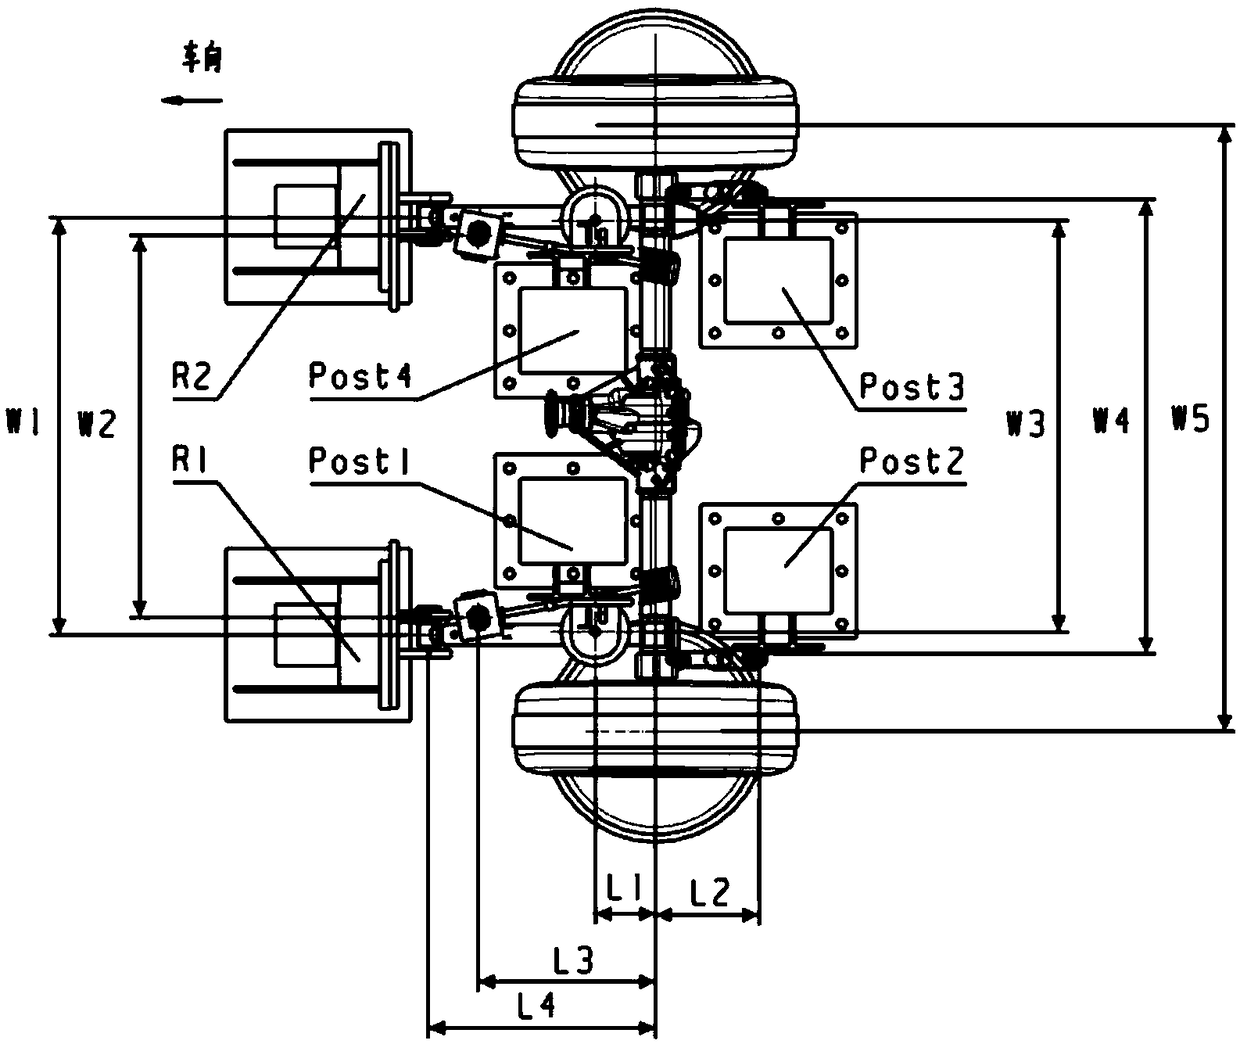 Fatigue endurance test device and method for a multi-link rear suspension axle housing assembly